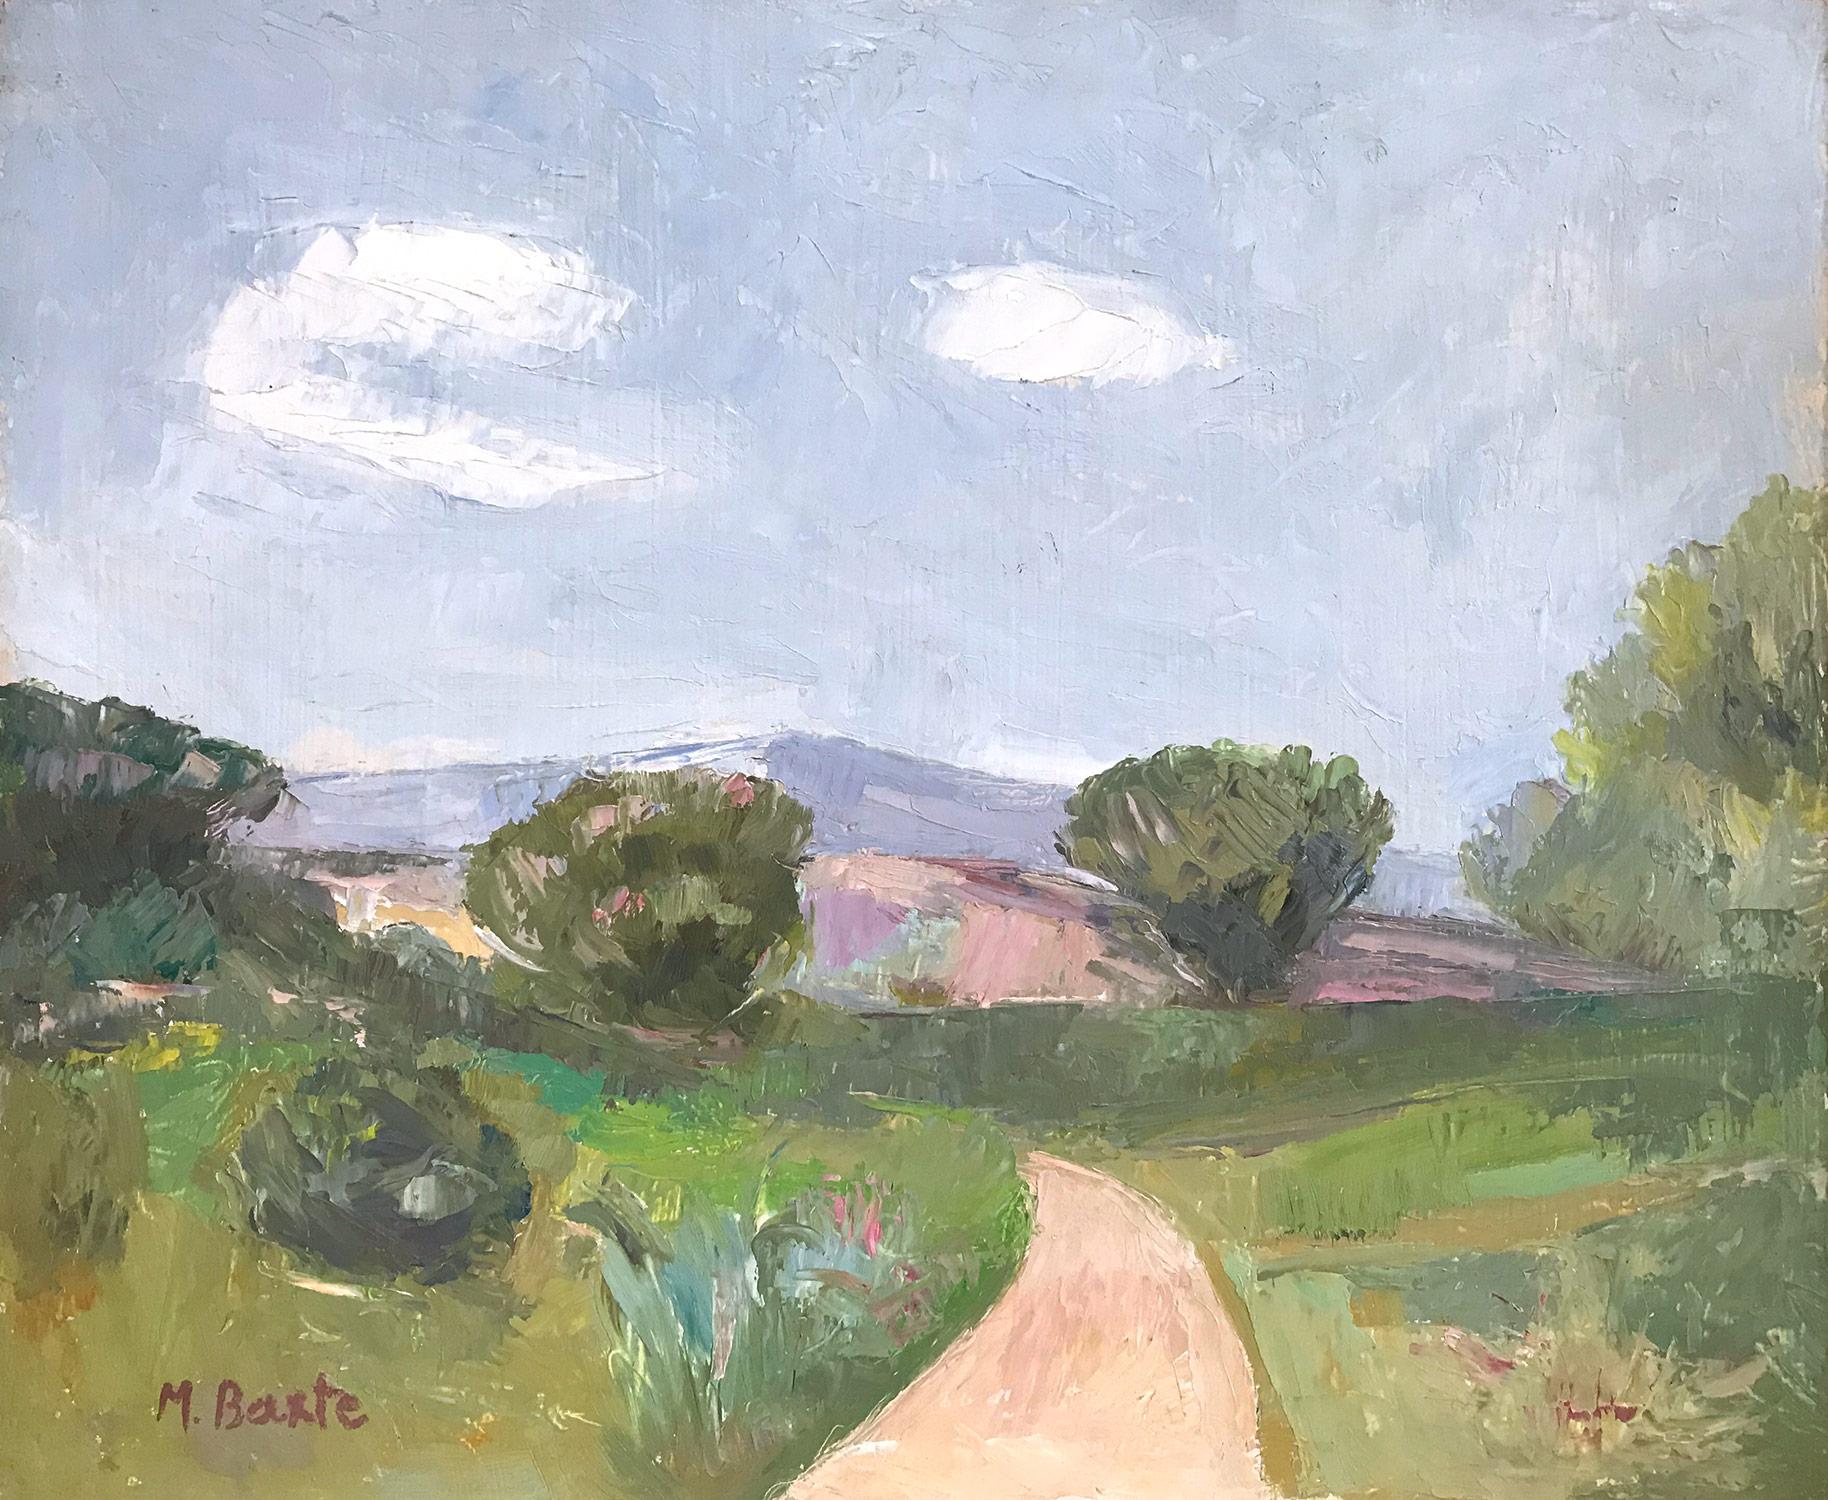 Michael Baxte Landscape Painting - "Countryside Landscape Hills Scene with Path" Expressionistic Style Oil Painting